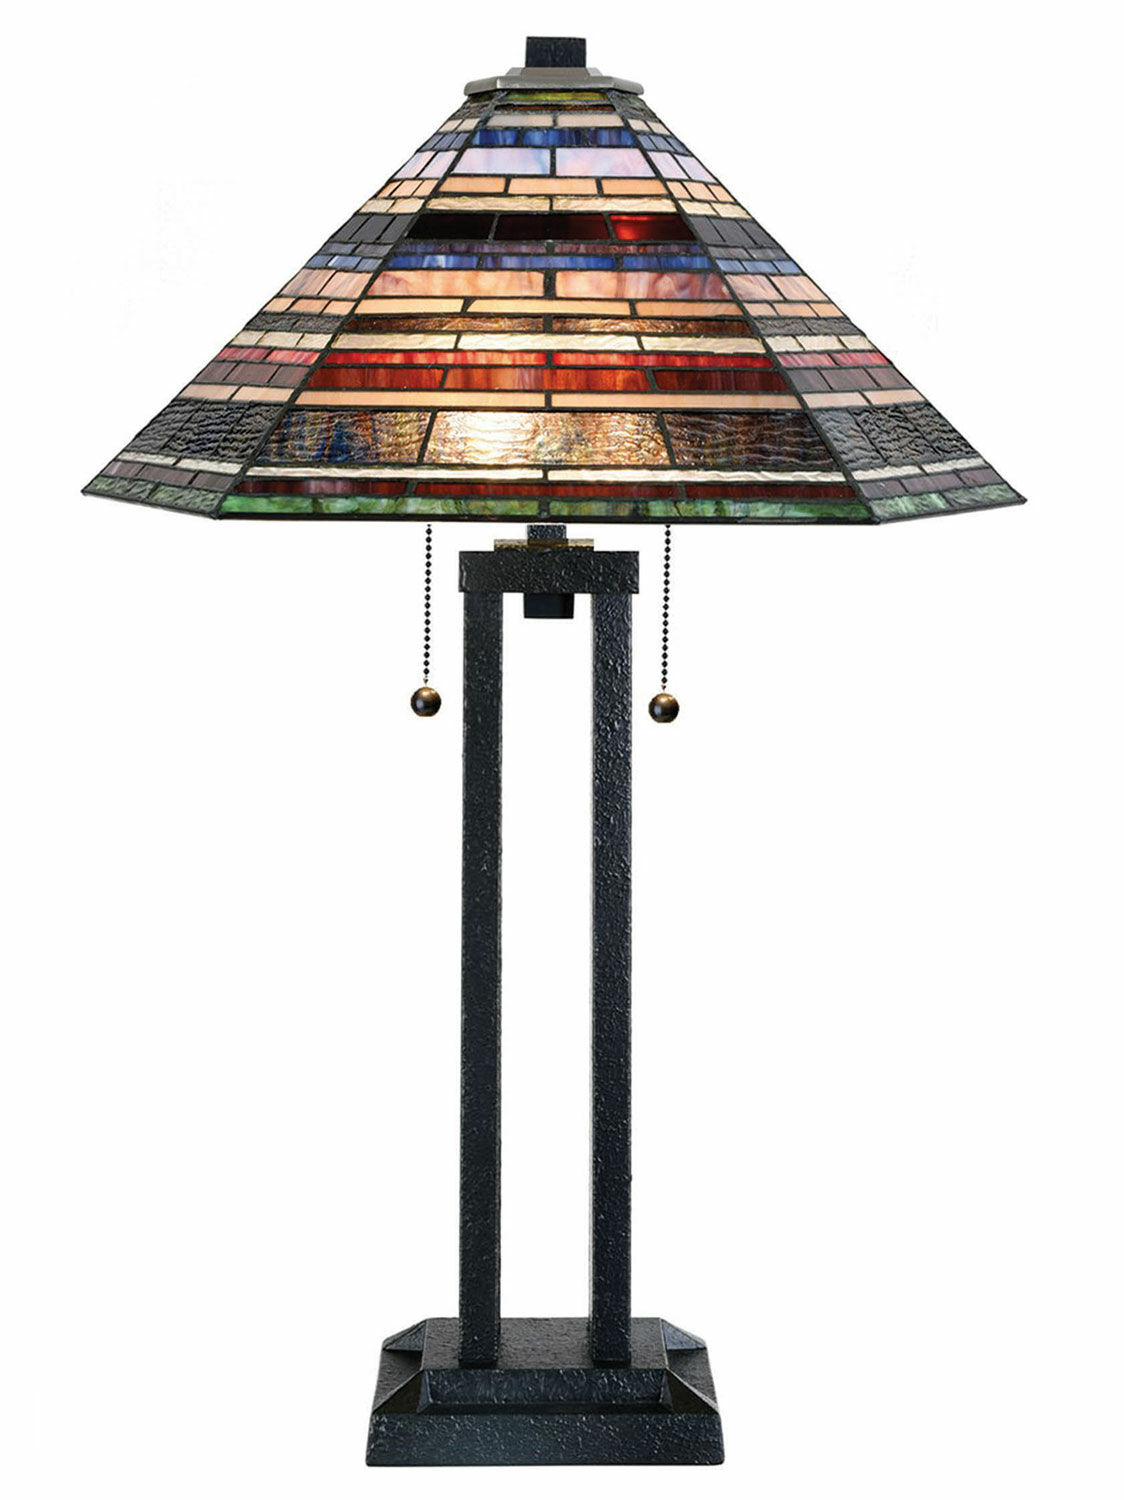 Table lamp "Dusk" - after Louis C. Tiffany